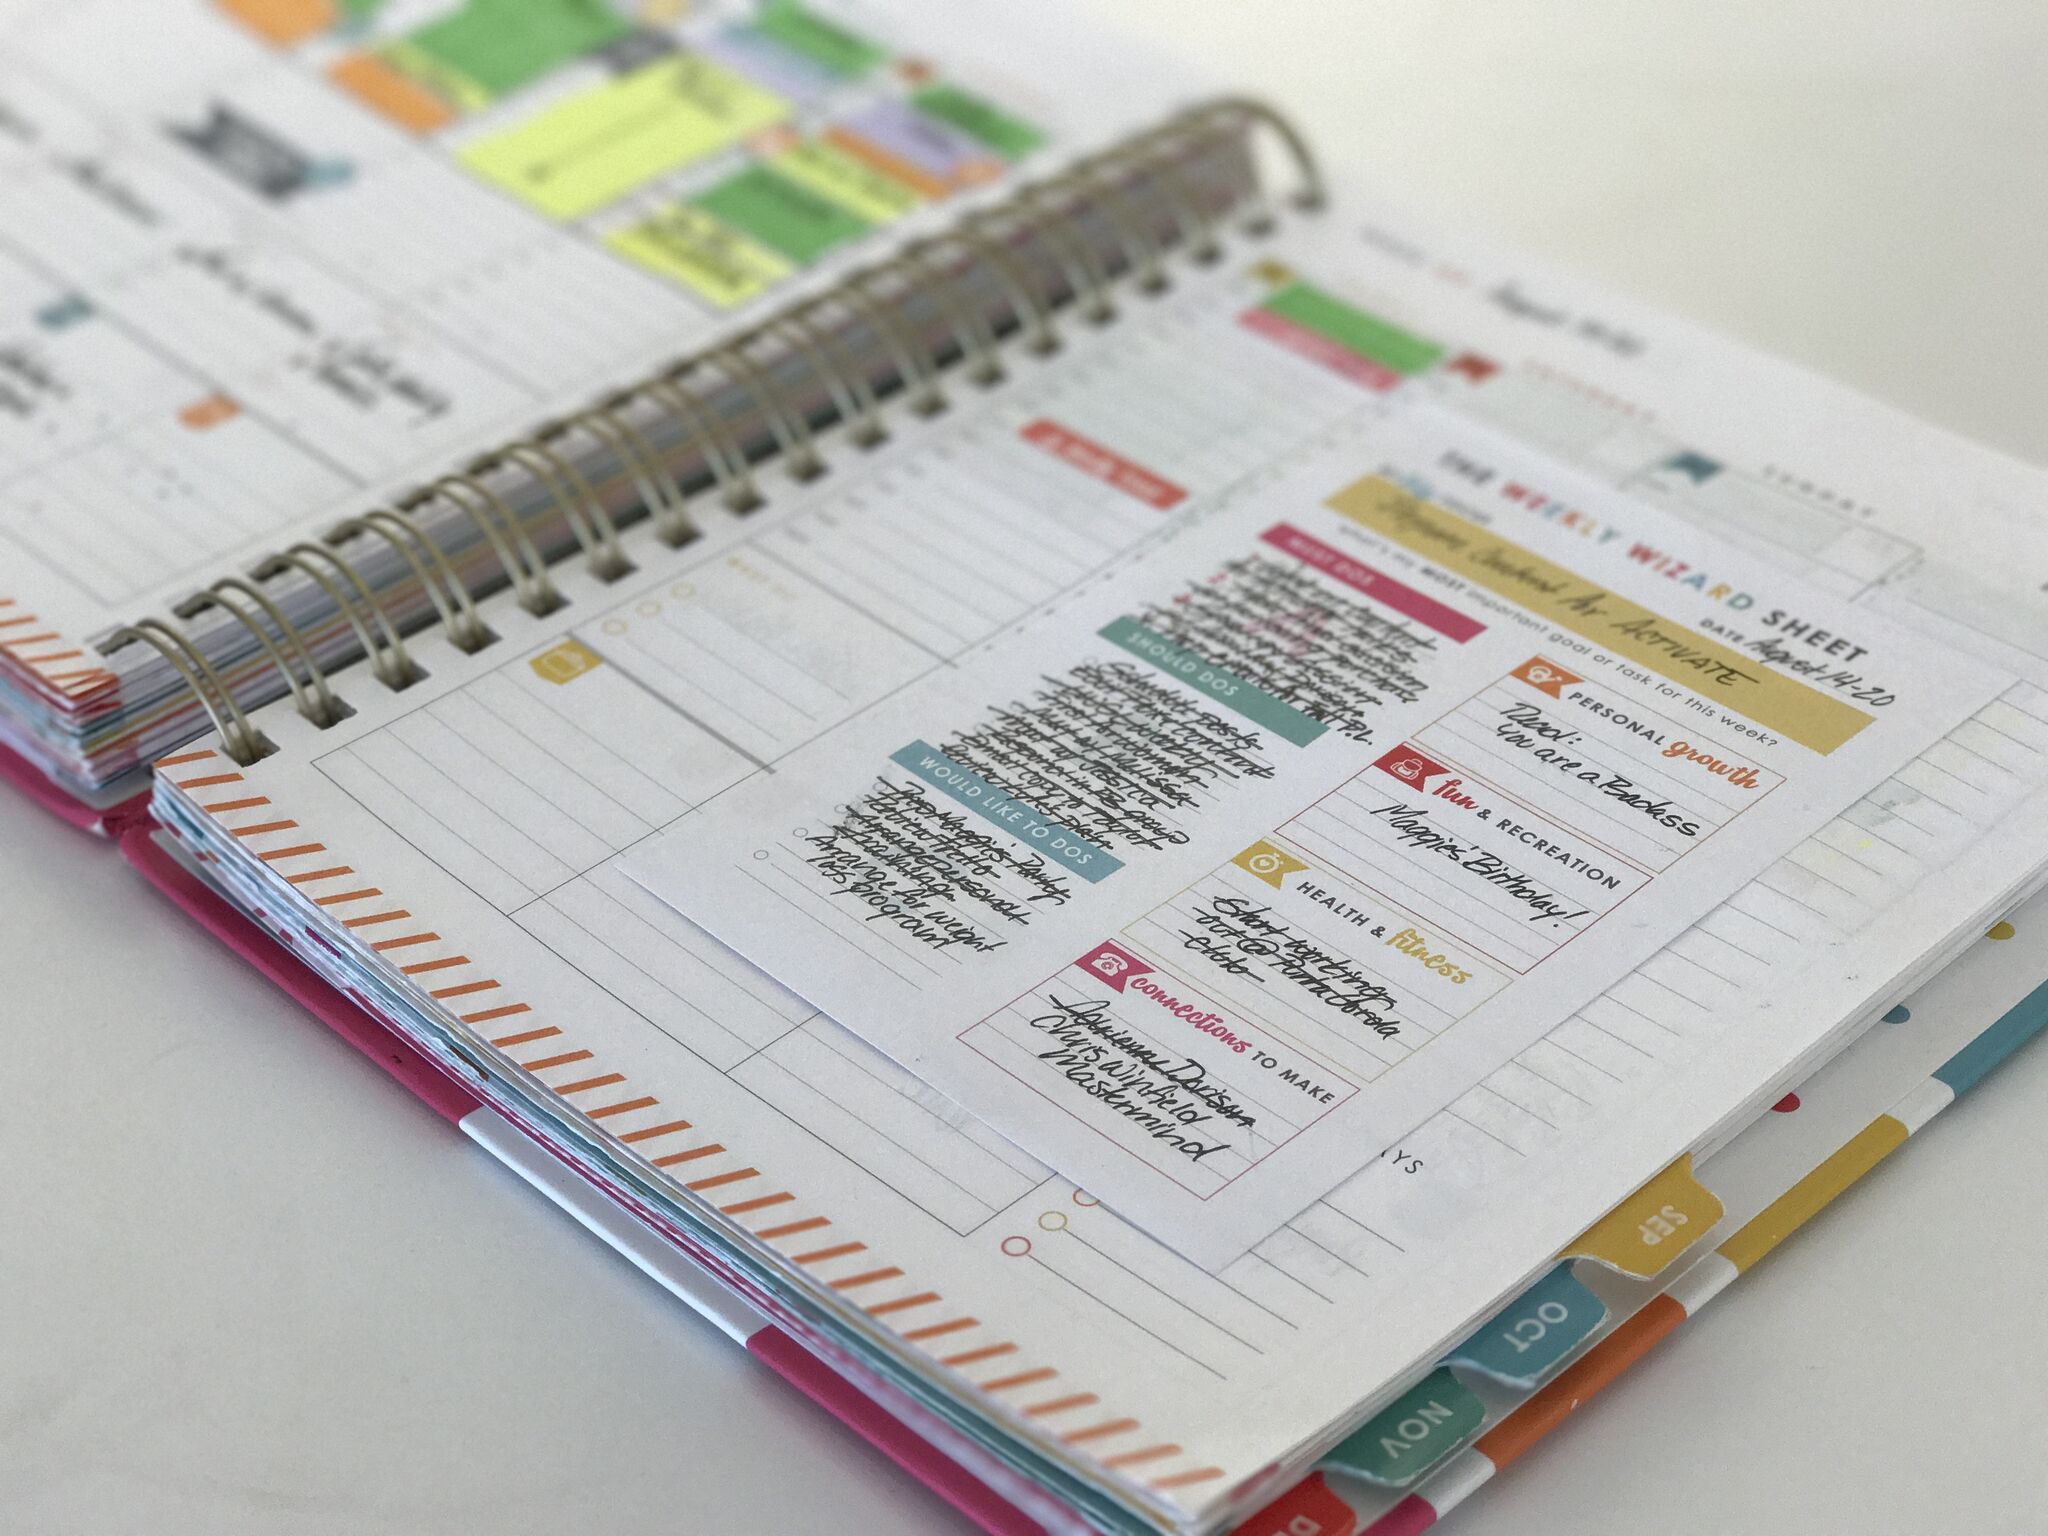 The Living Well Planner is your best friend when working towards living the life you want